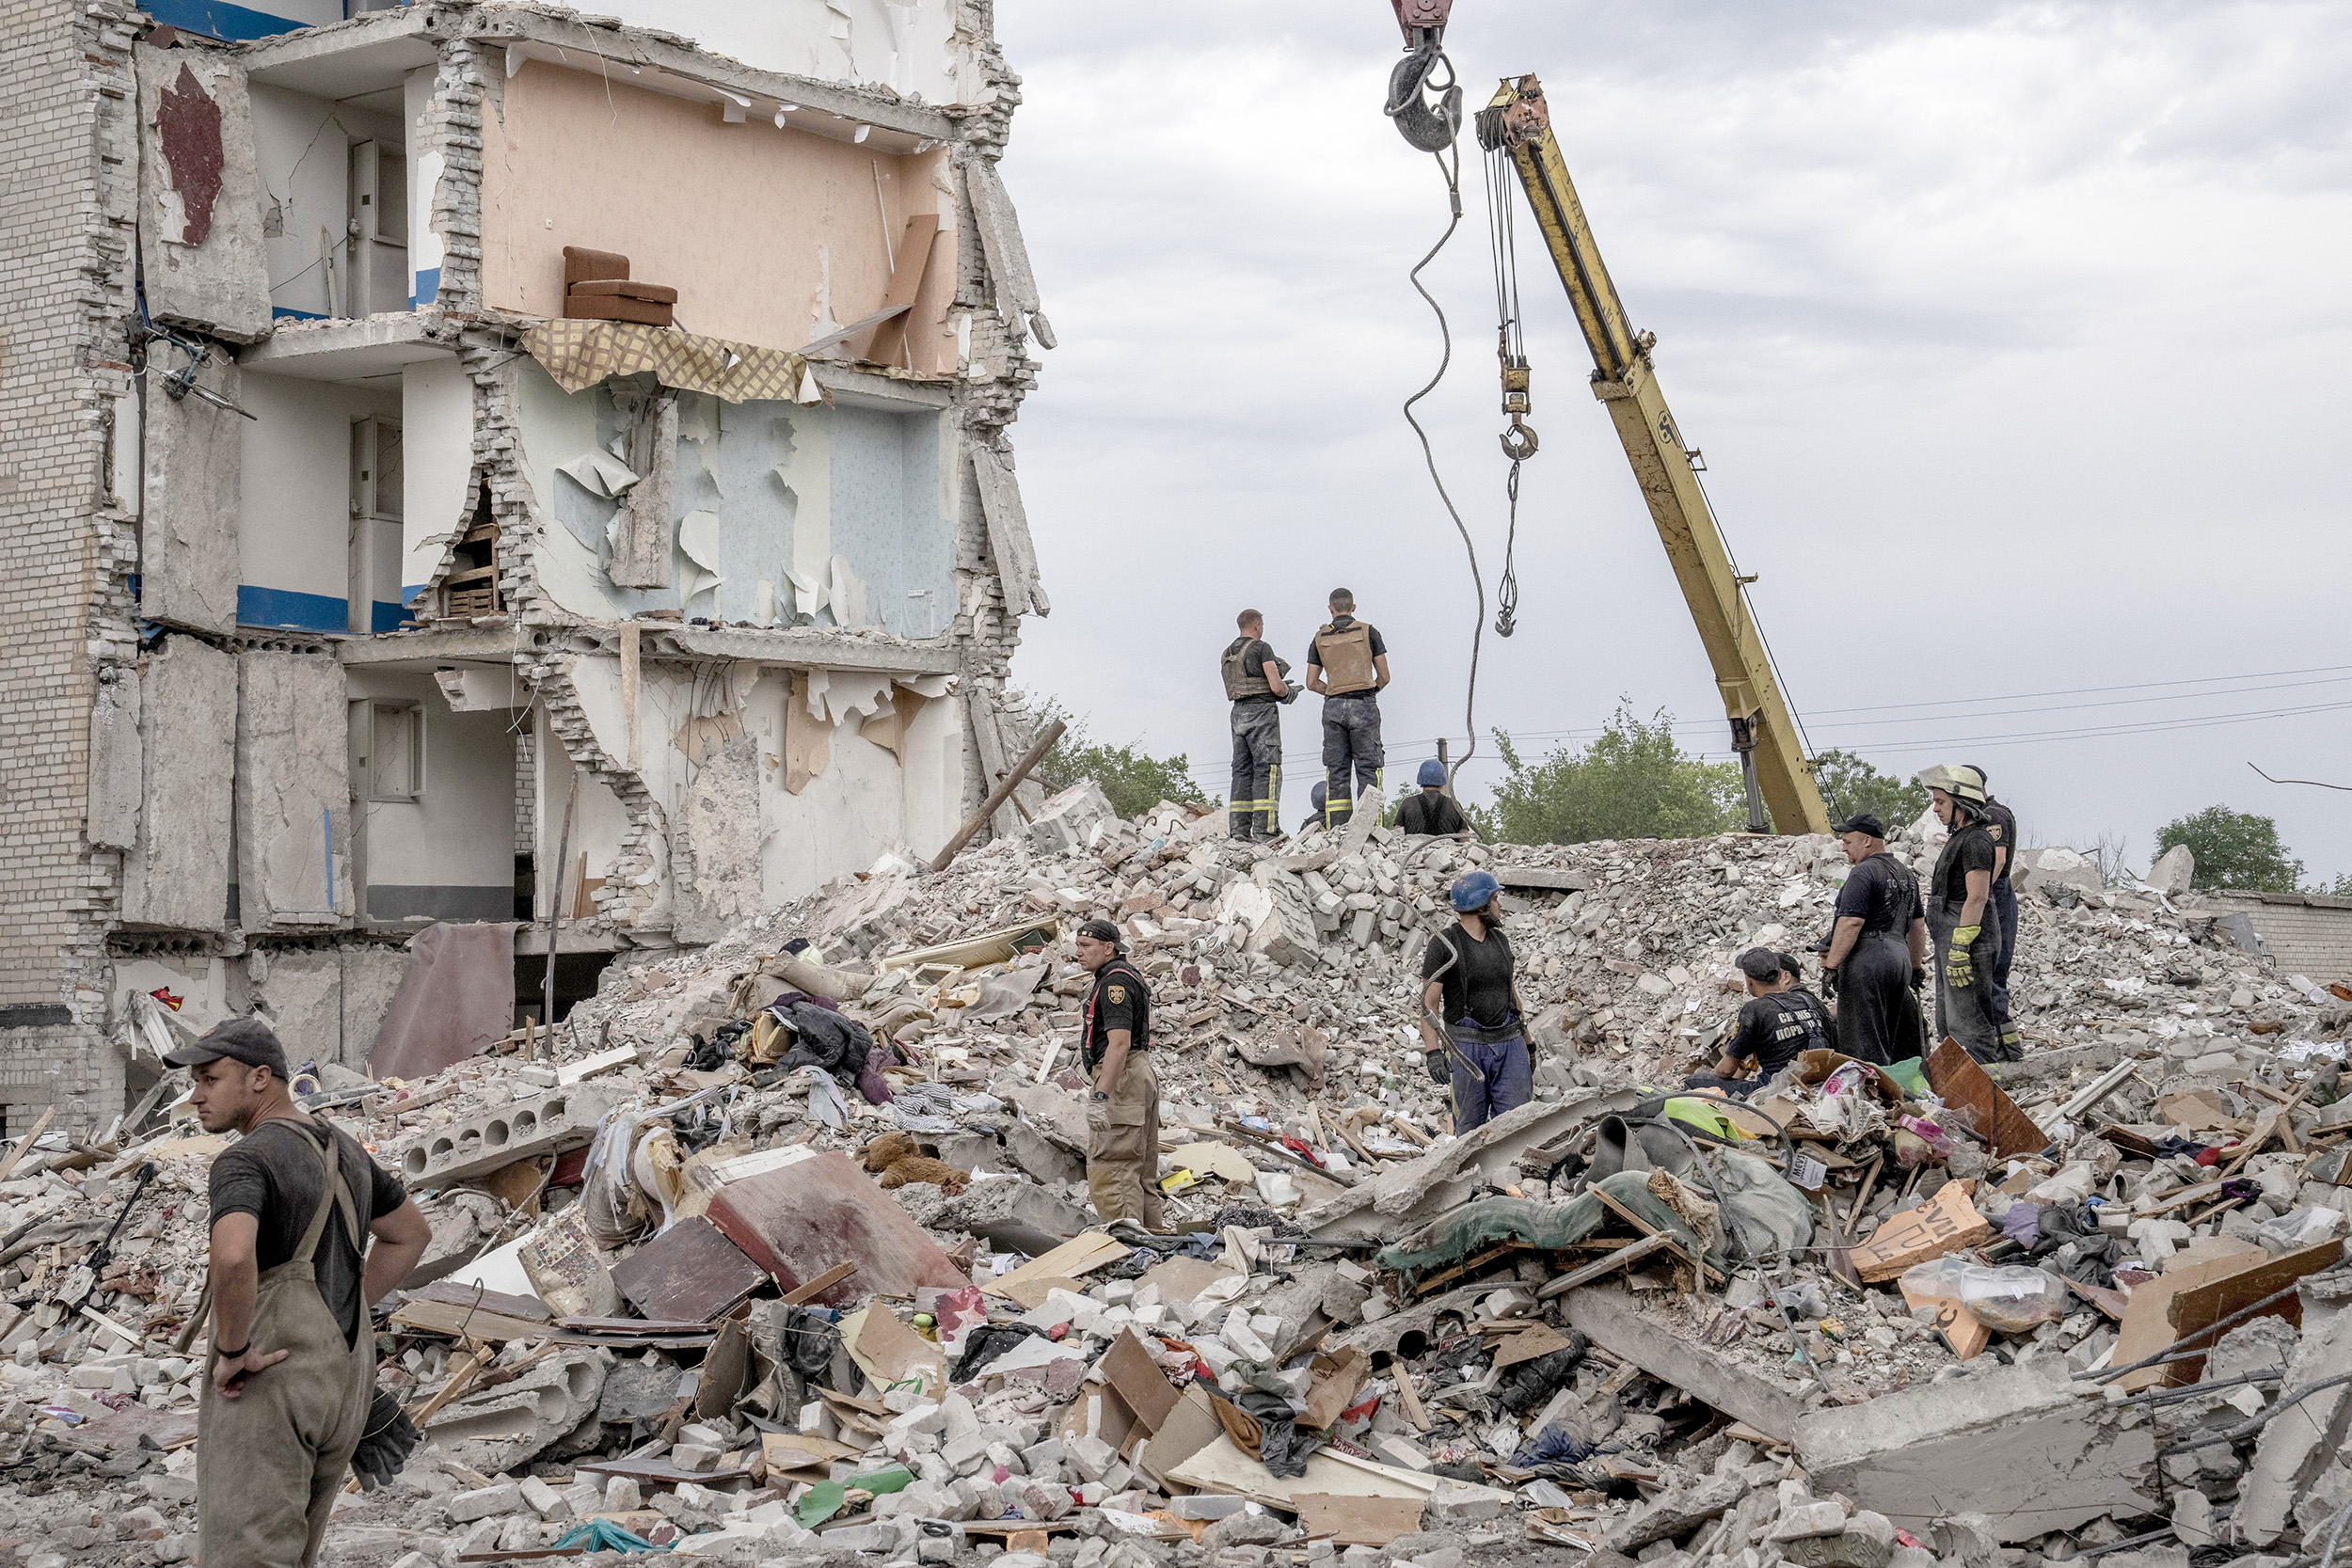 Rescue workers stand on the rubble in the aftermath of a Russian rocket attack that hit an apartment residential block, in Chasiv Yar, Donetsk region, eastern Ukraine, on July 10.